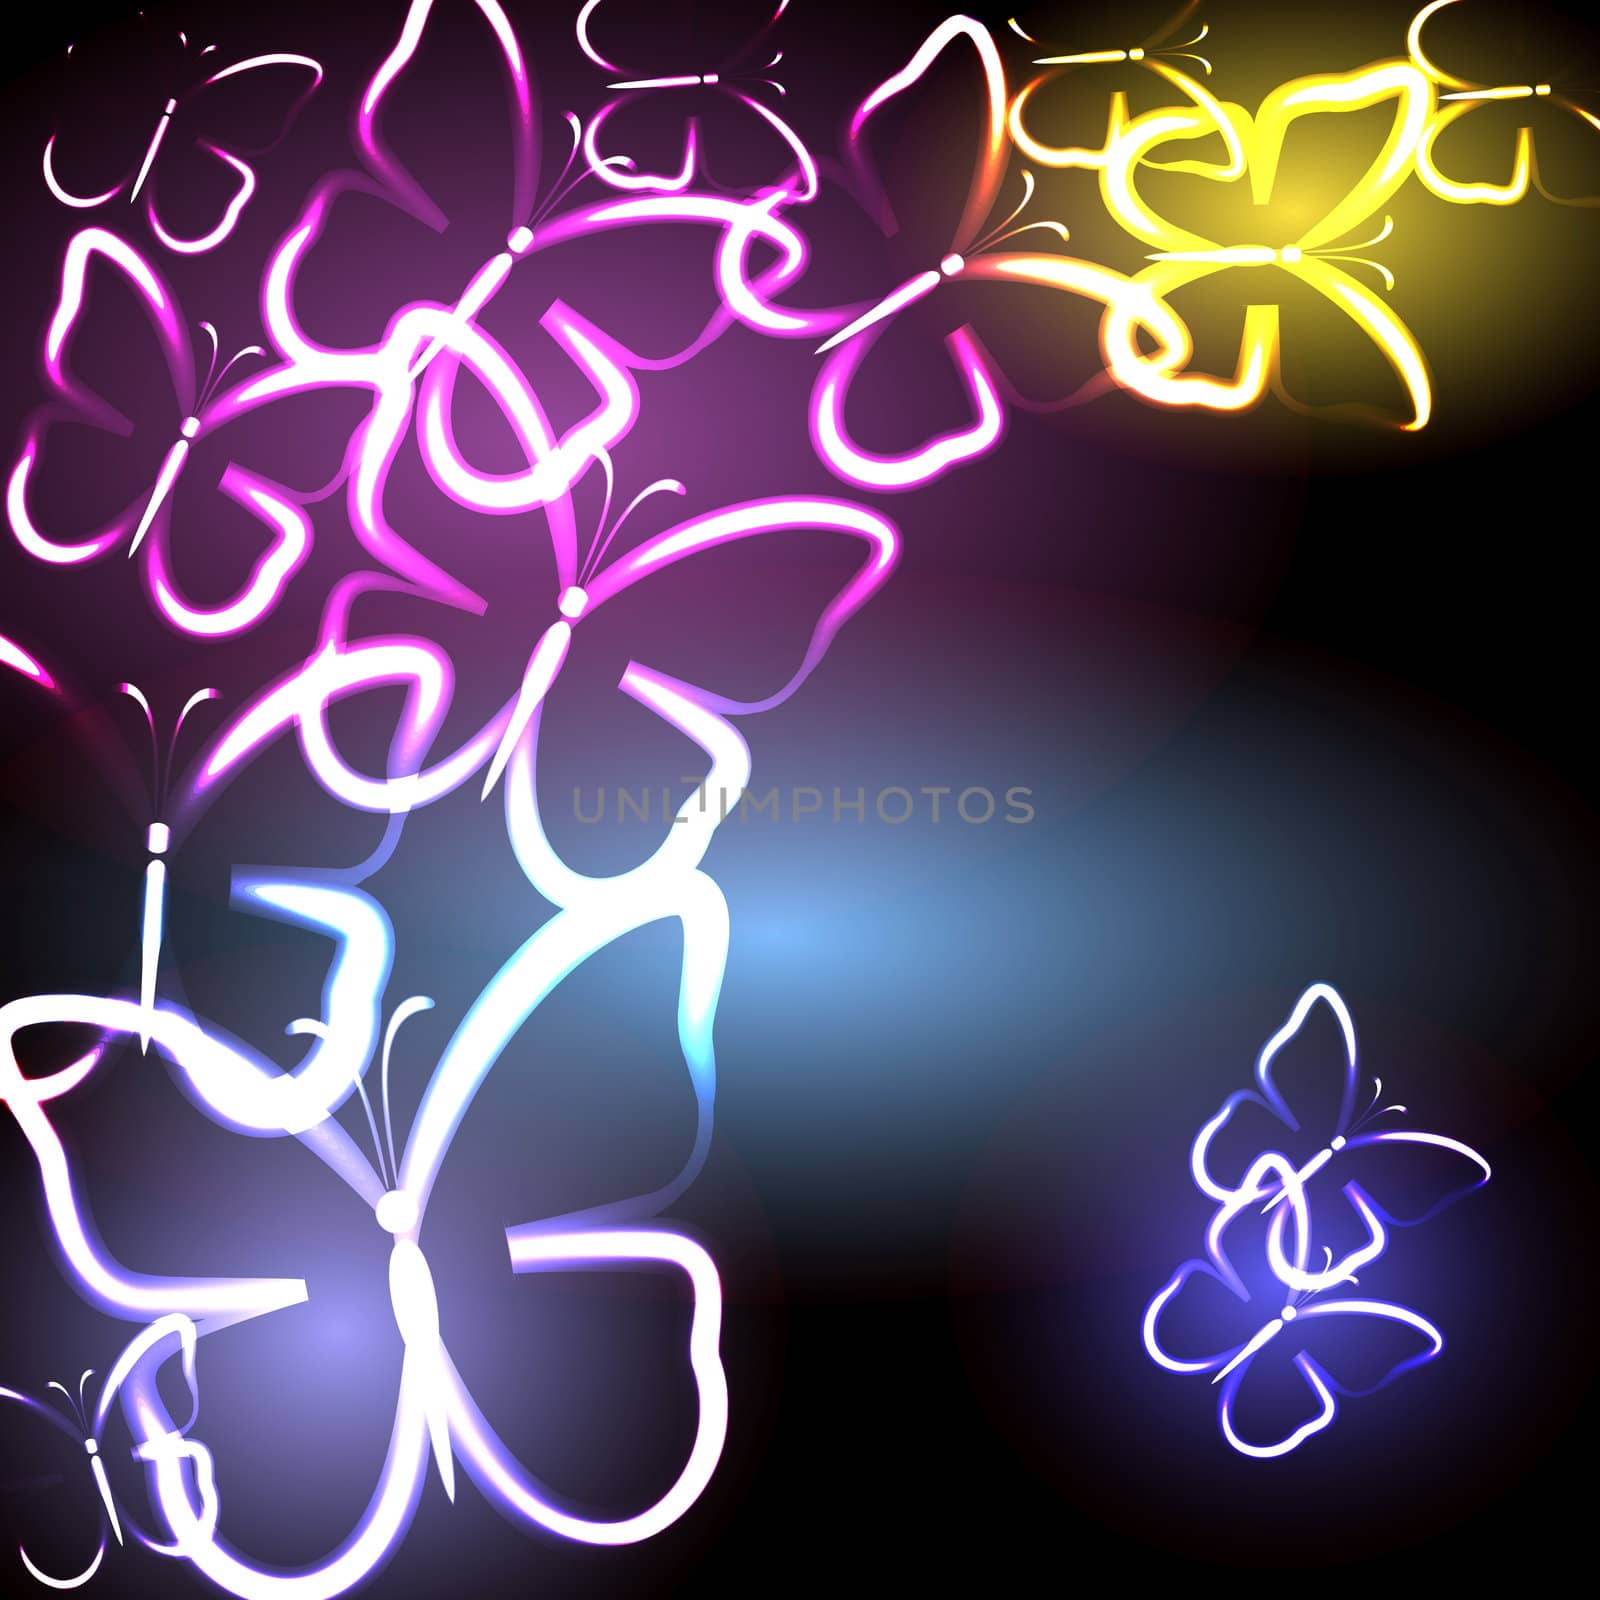 Glowing abstract background with butterfly, illustration for your design by svtrotof